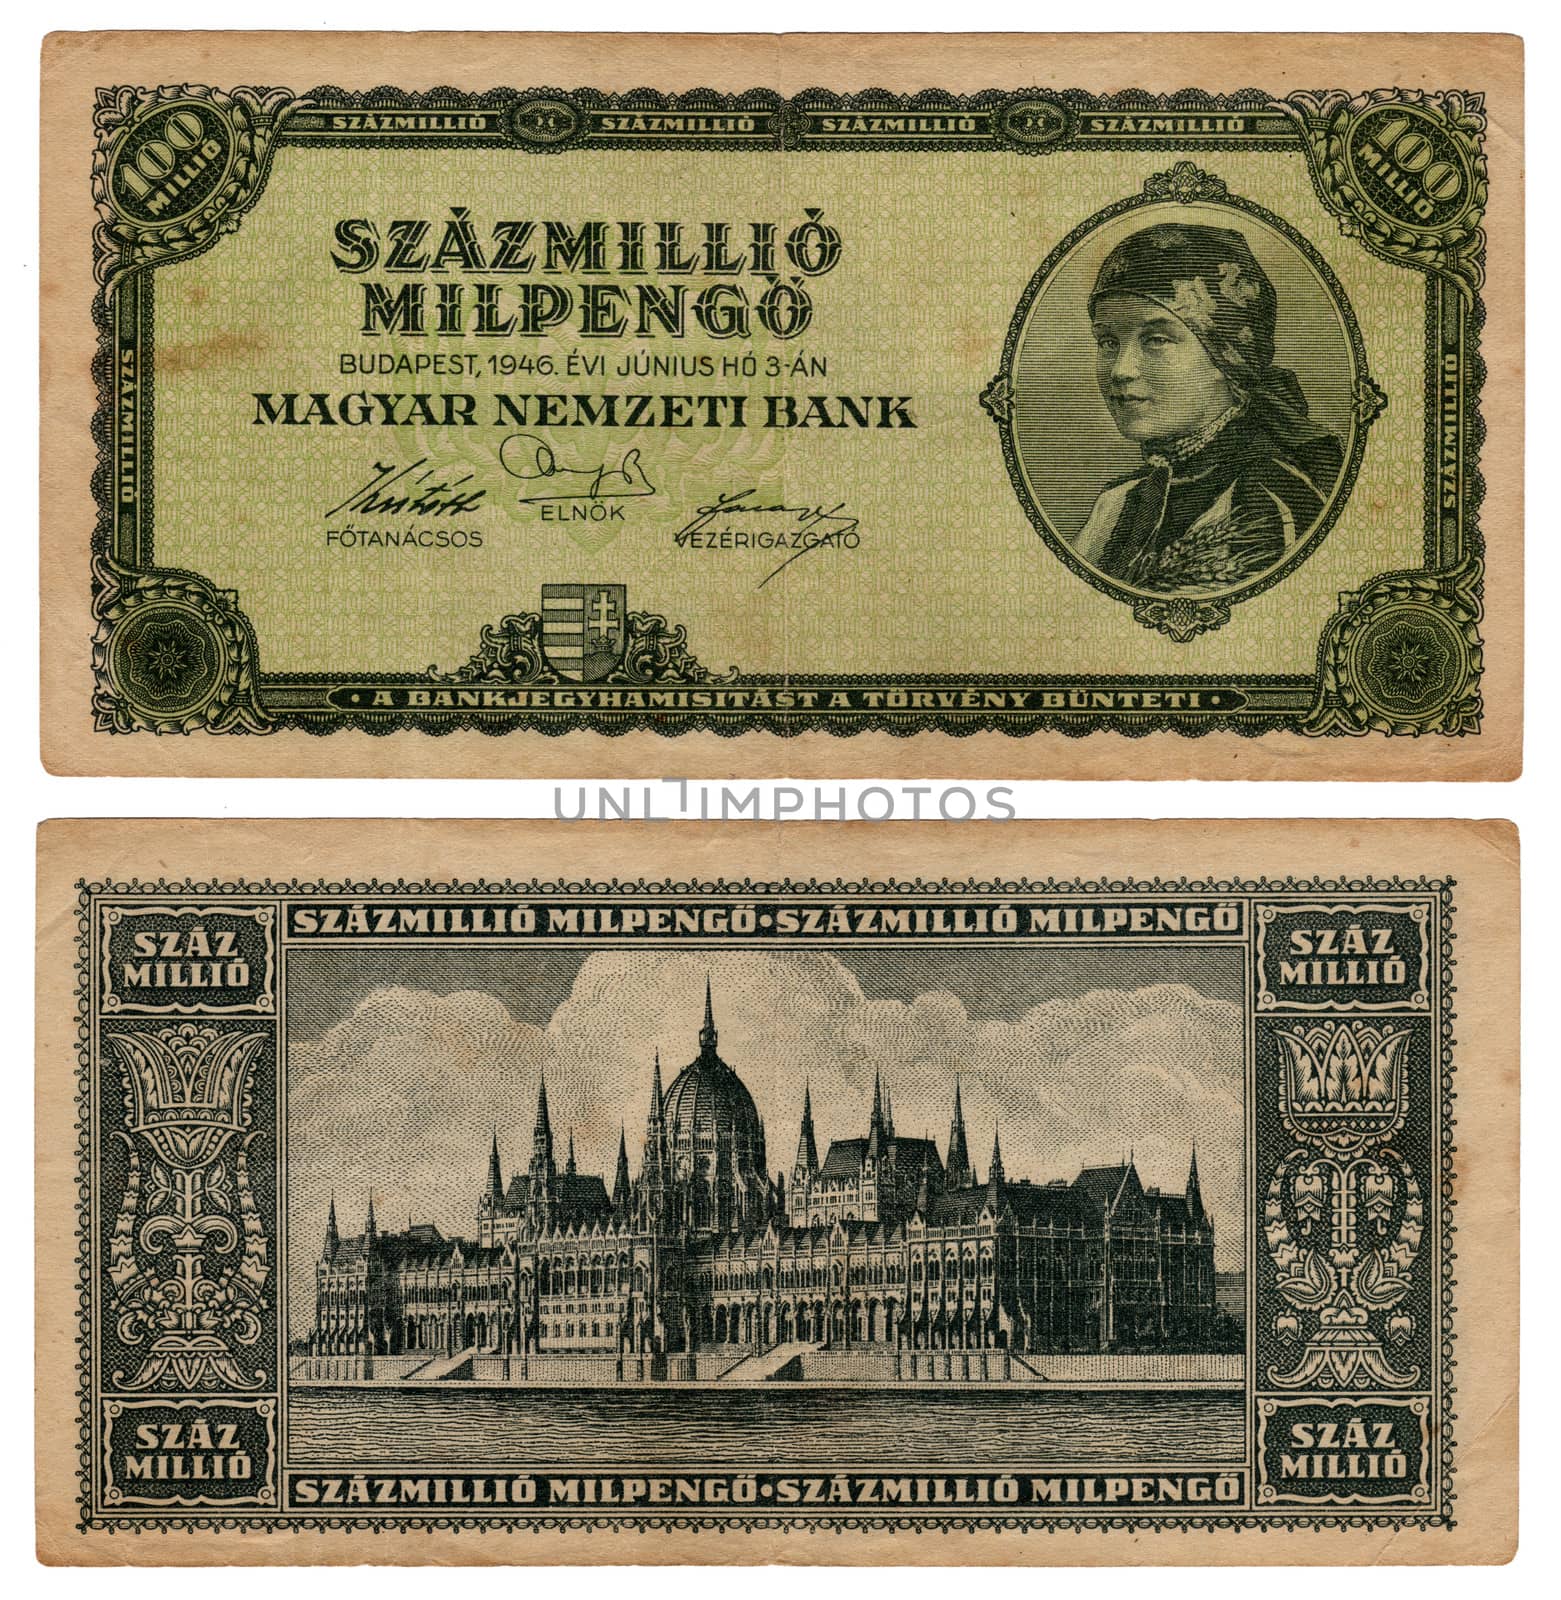 high resolution vintage hungarian banknote from 1946